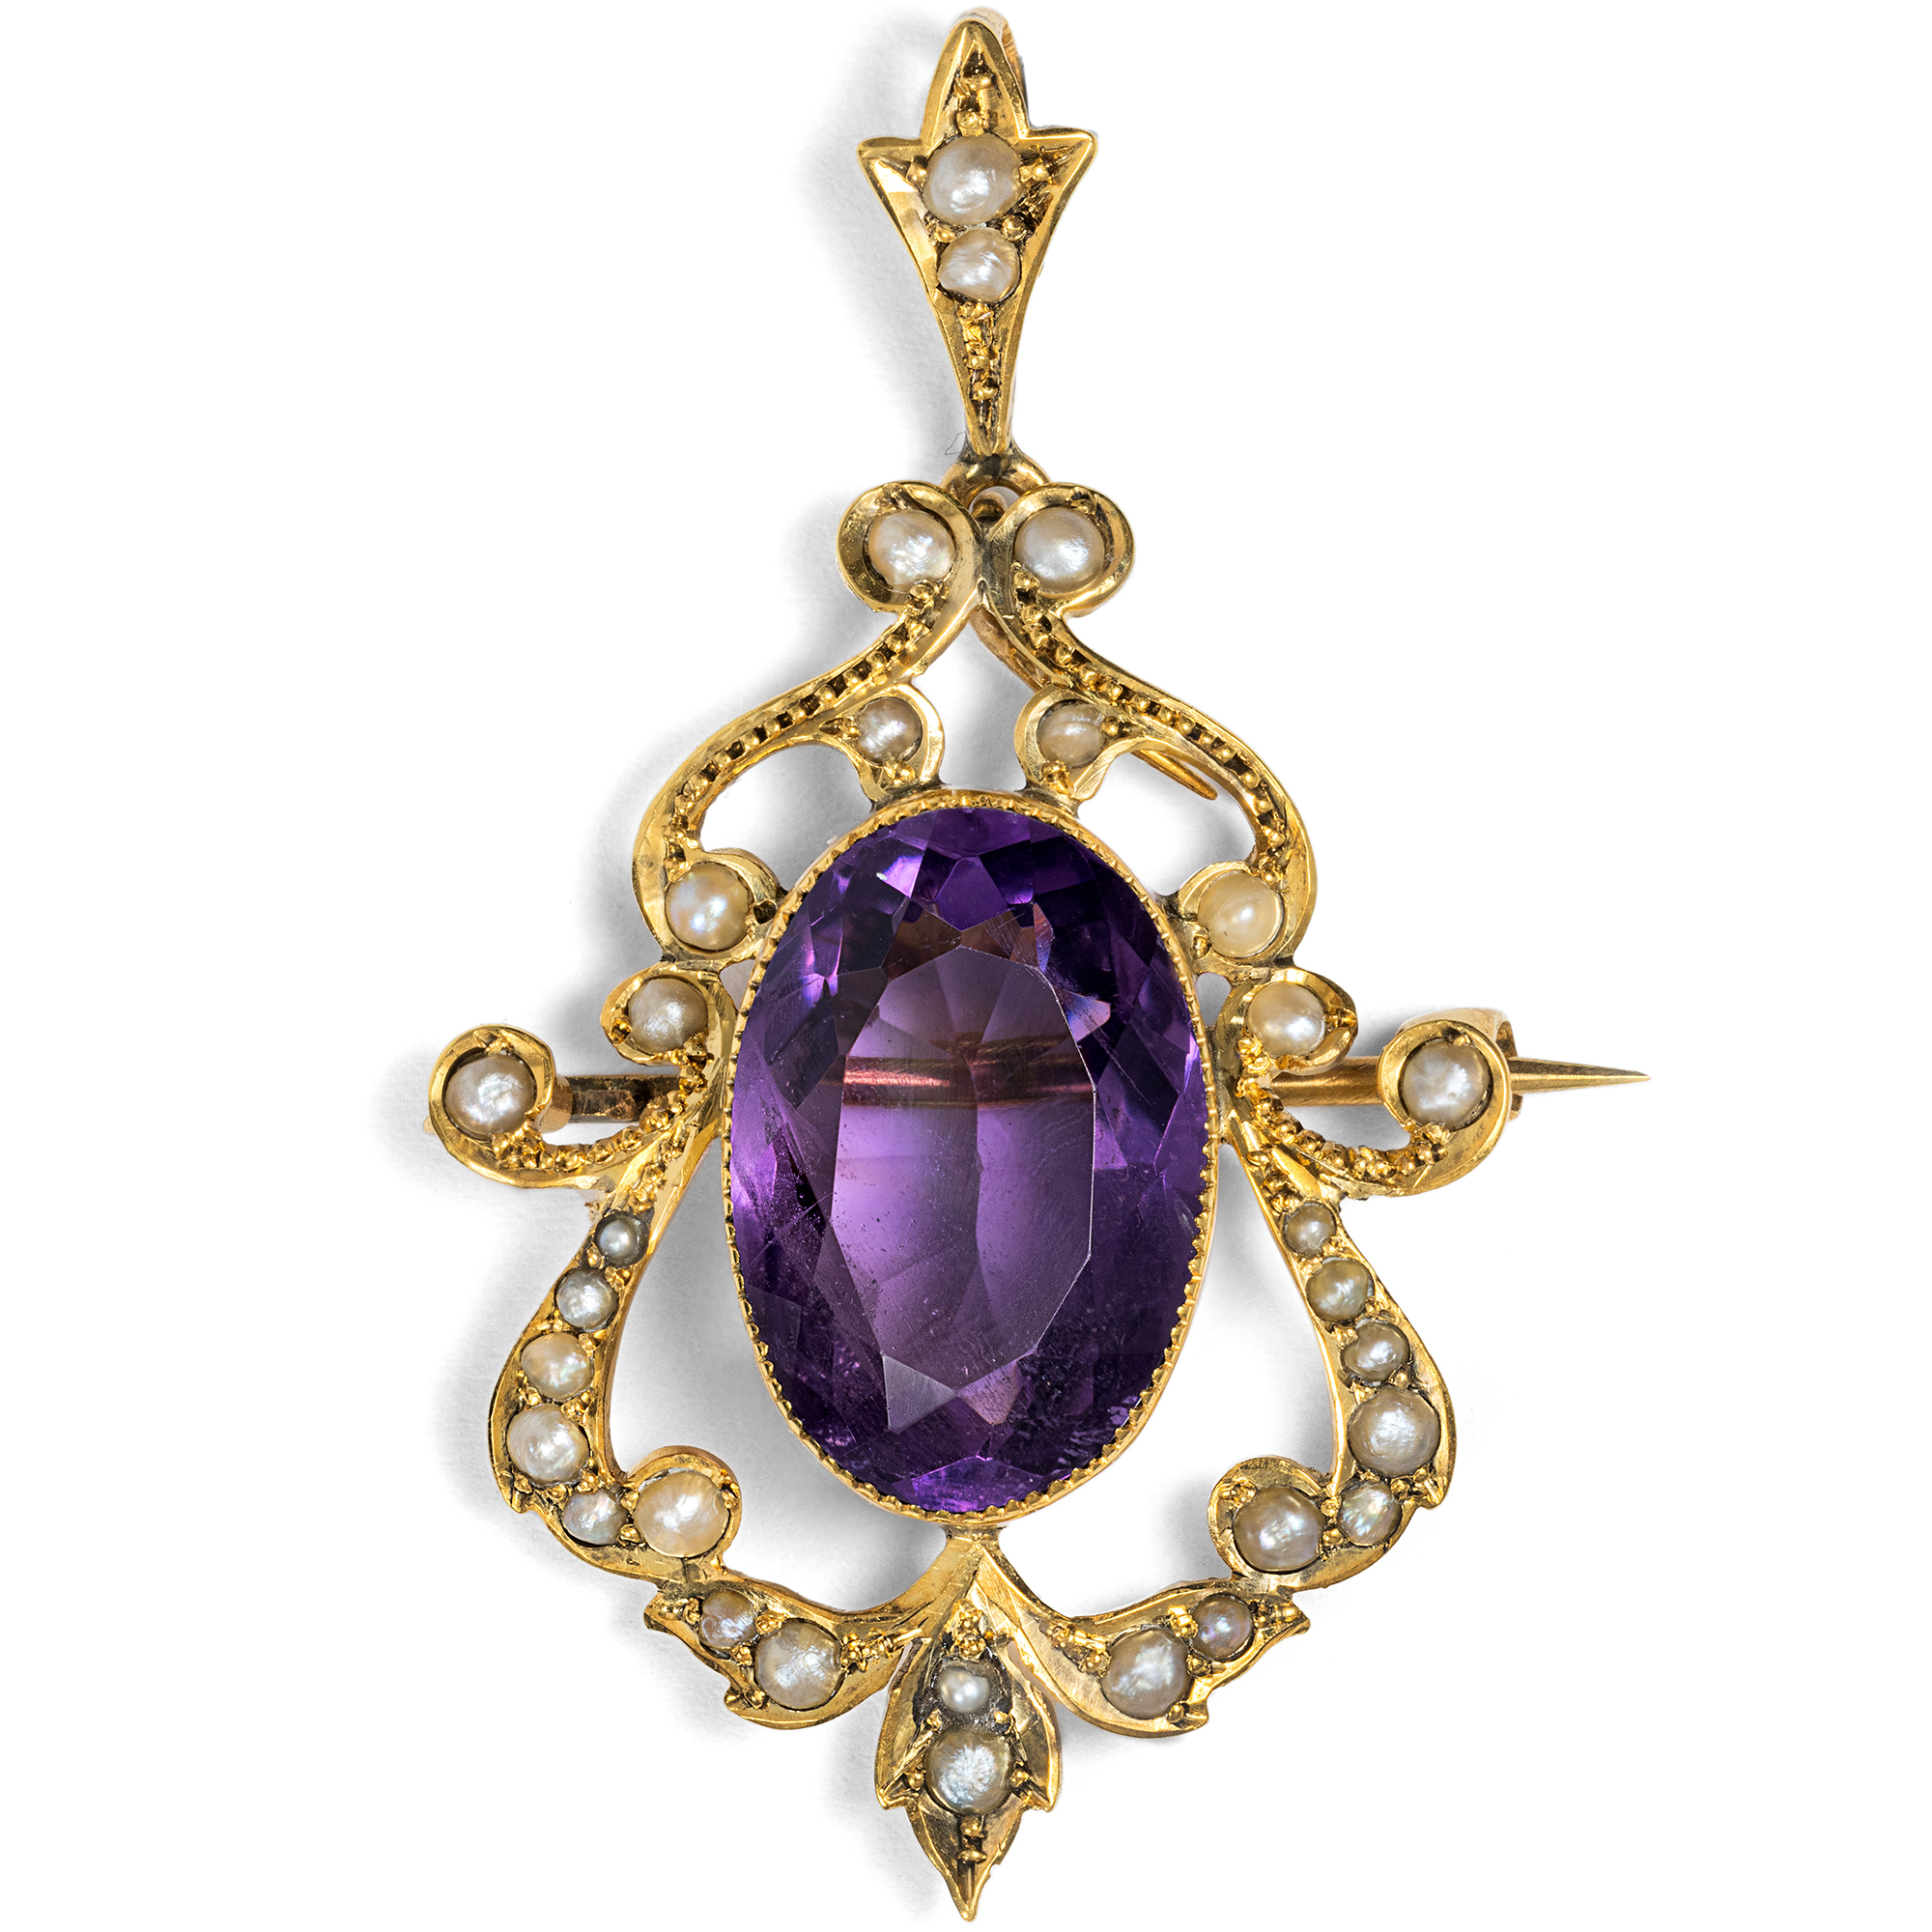 Antique pendant brooch with amethysts & pearls in gold, circa 1905